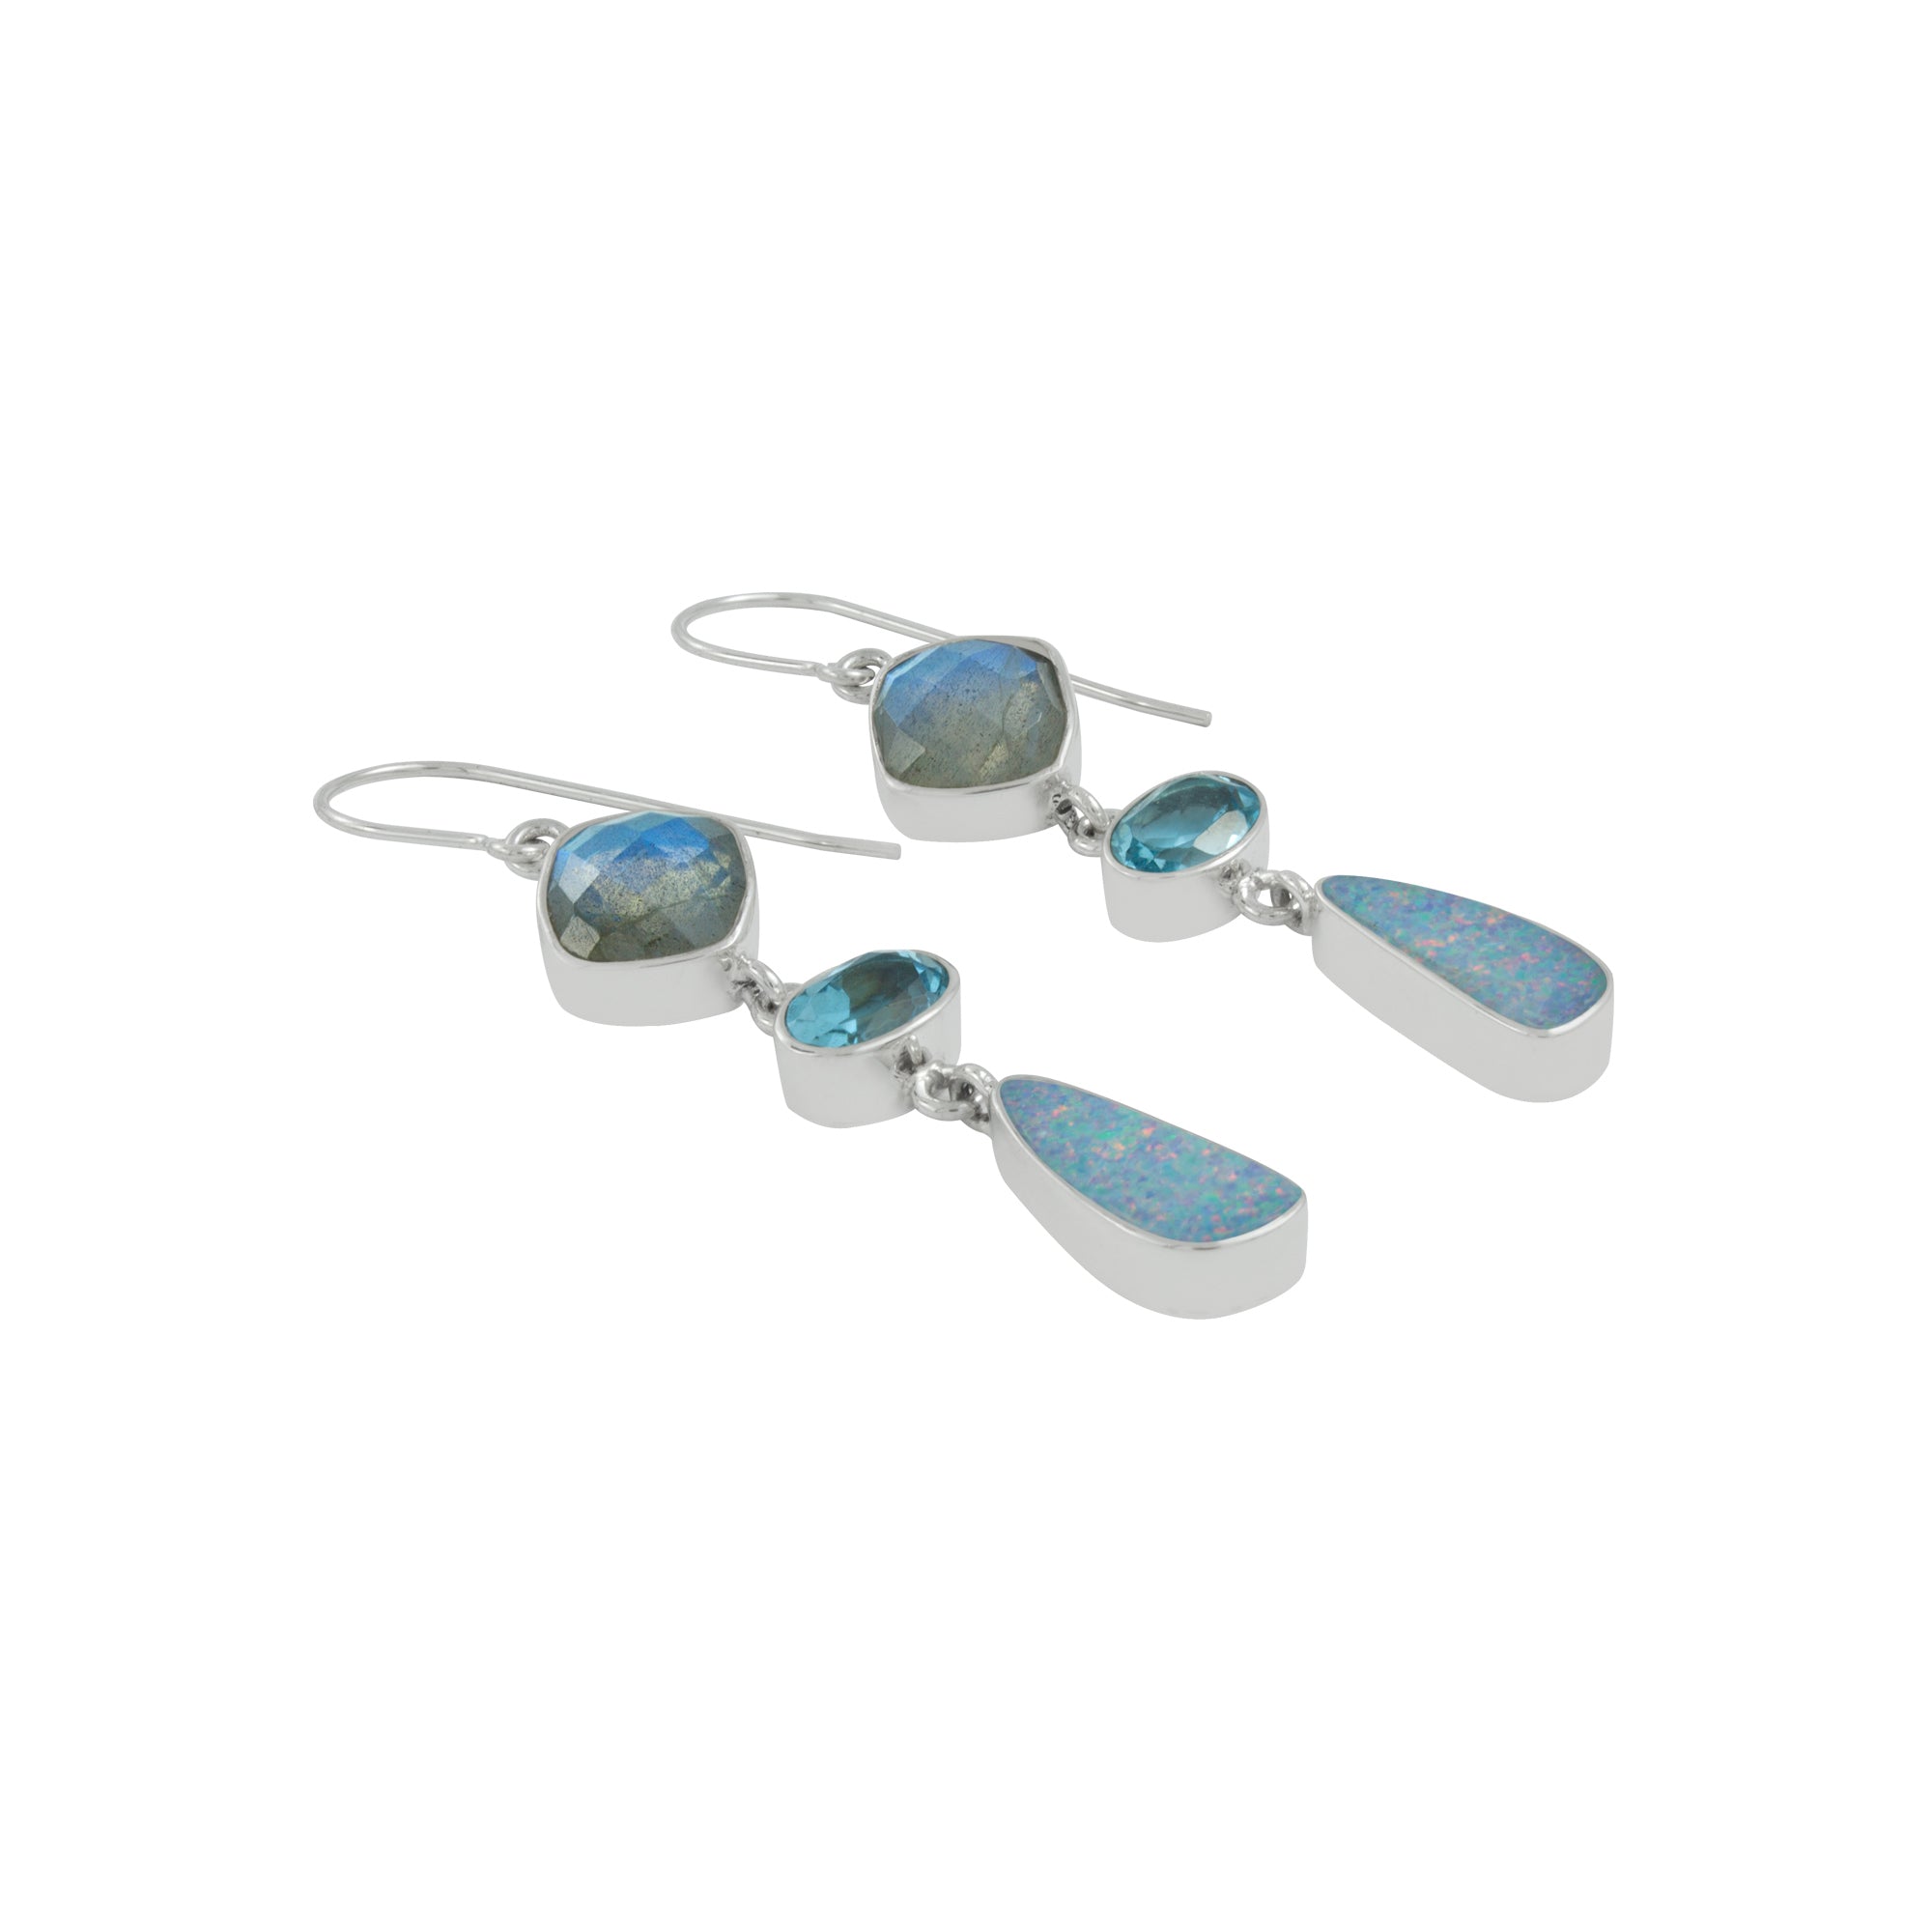 Silver Earring With Laboradite SQ Cush Checker, Blue Topaz , And Opal Free Form